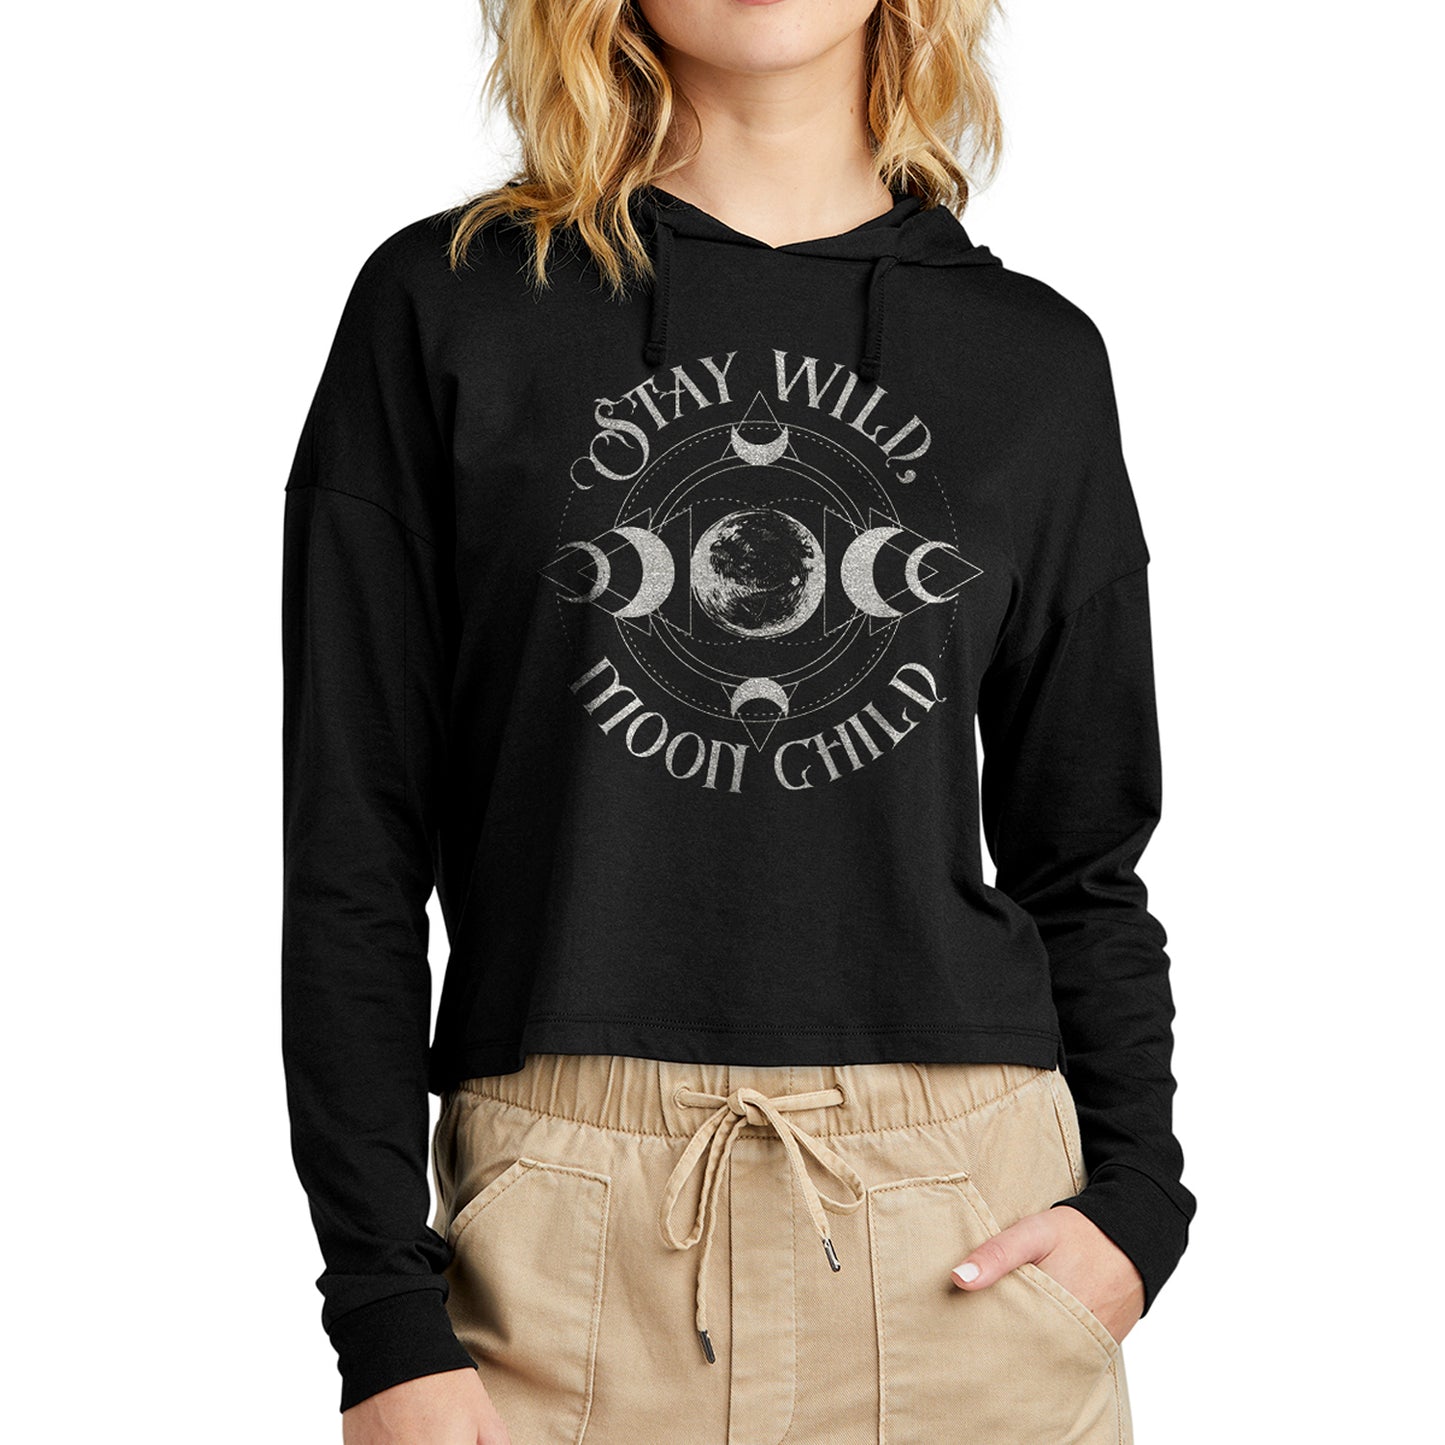 A female model wearing a black long sleeve T-shirt with silver text saying "Stay Wild Moon Child." There is a depiction of the Moon in the center, with crescent Moon phases at top, bottom, left, and right of the center. There are thin circles around the moon phases, connecting them to each other.